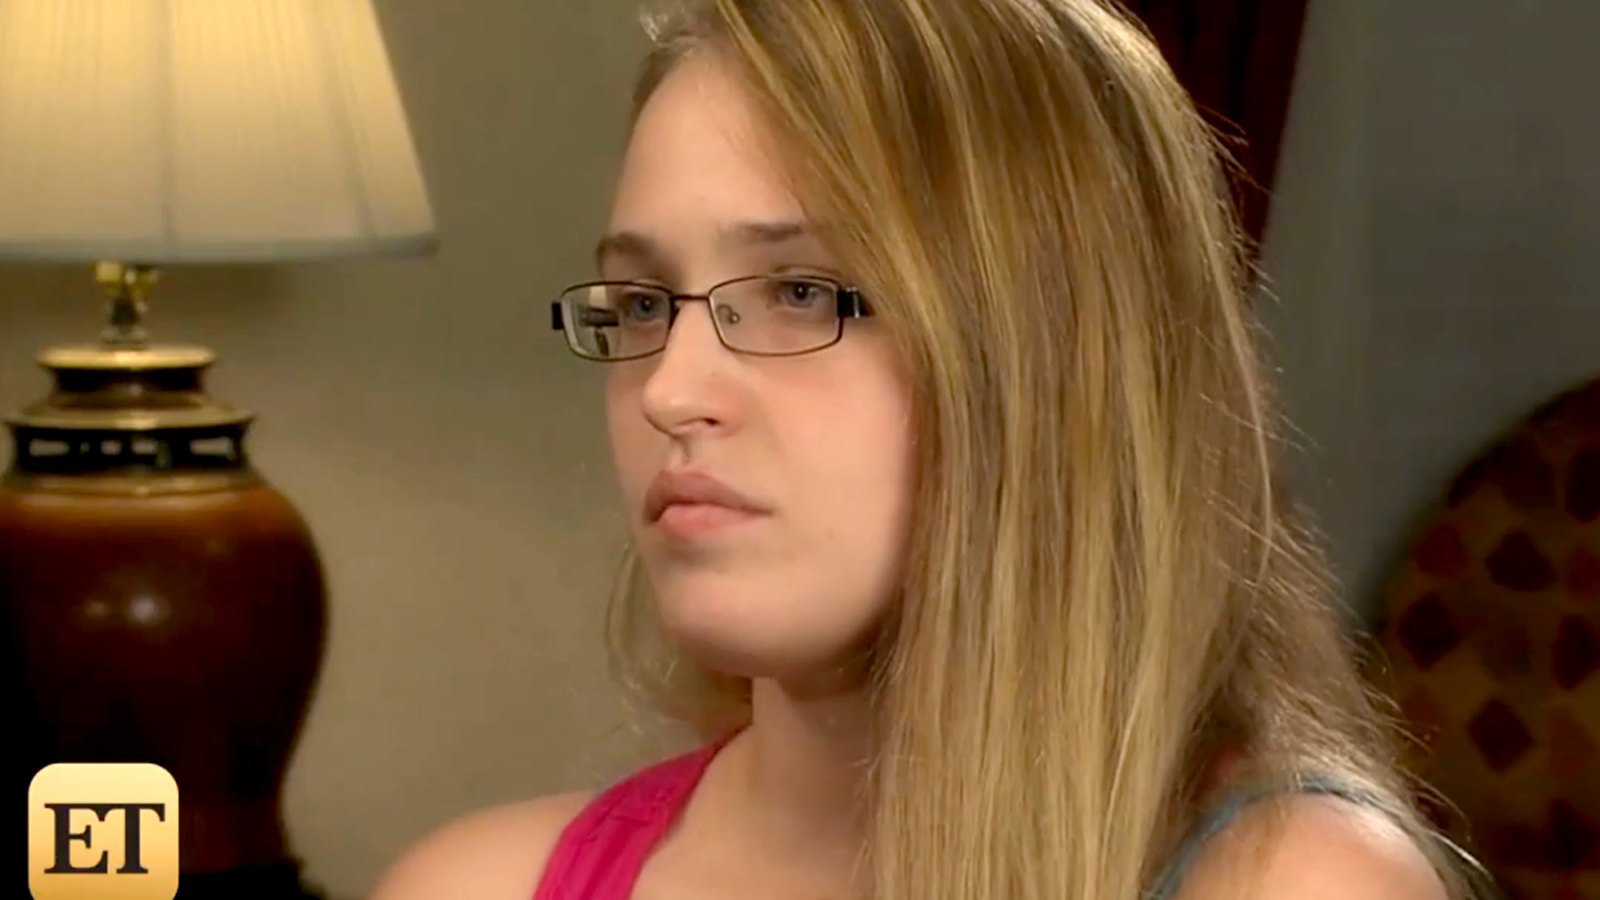 Honey Boo Boo's Anna Cardwell Speaks Out: "I Feel Betrayed"